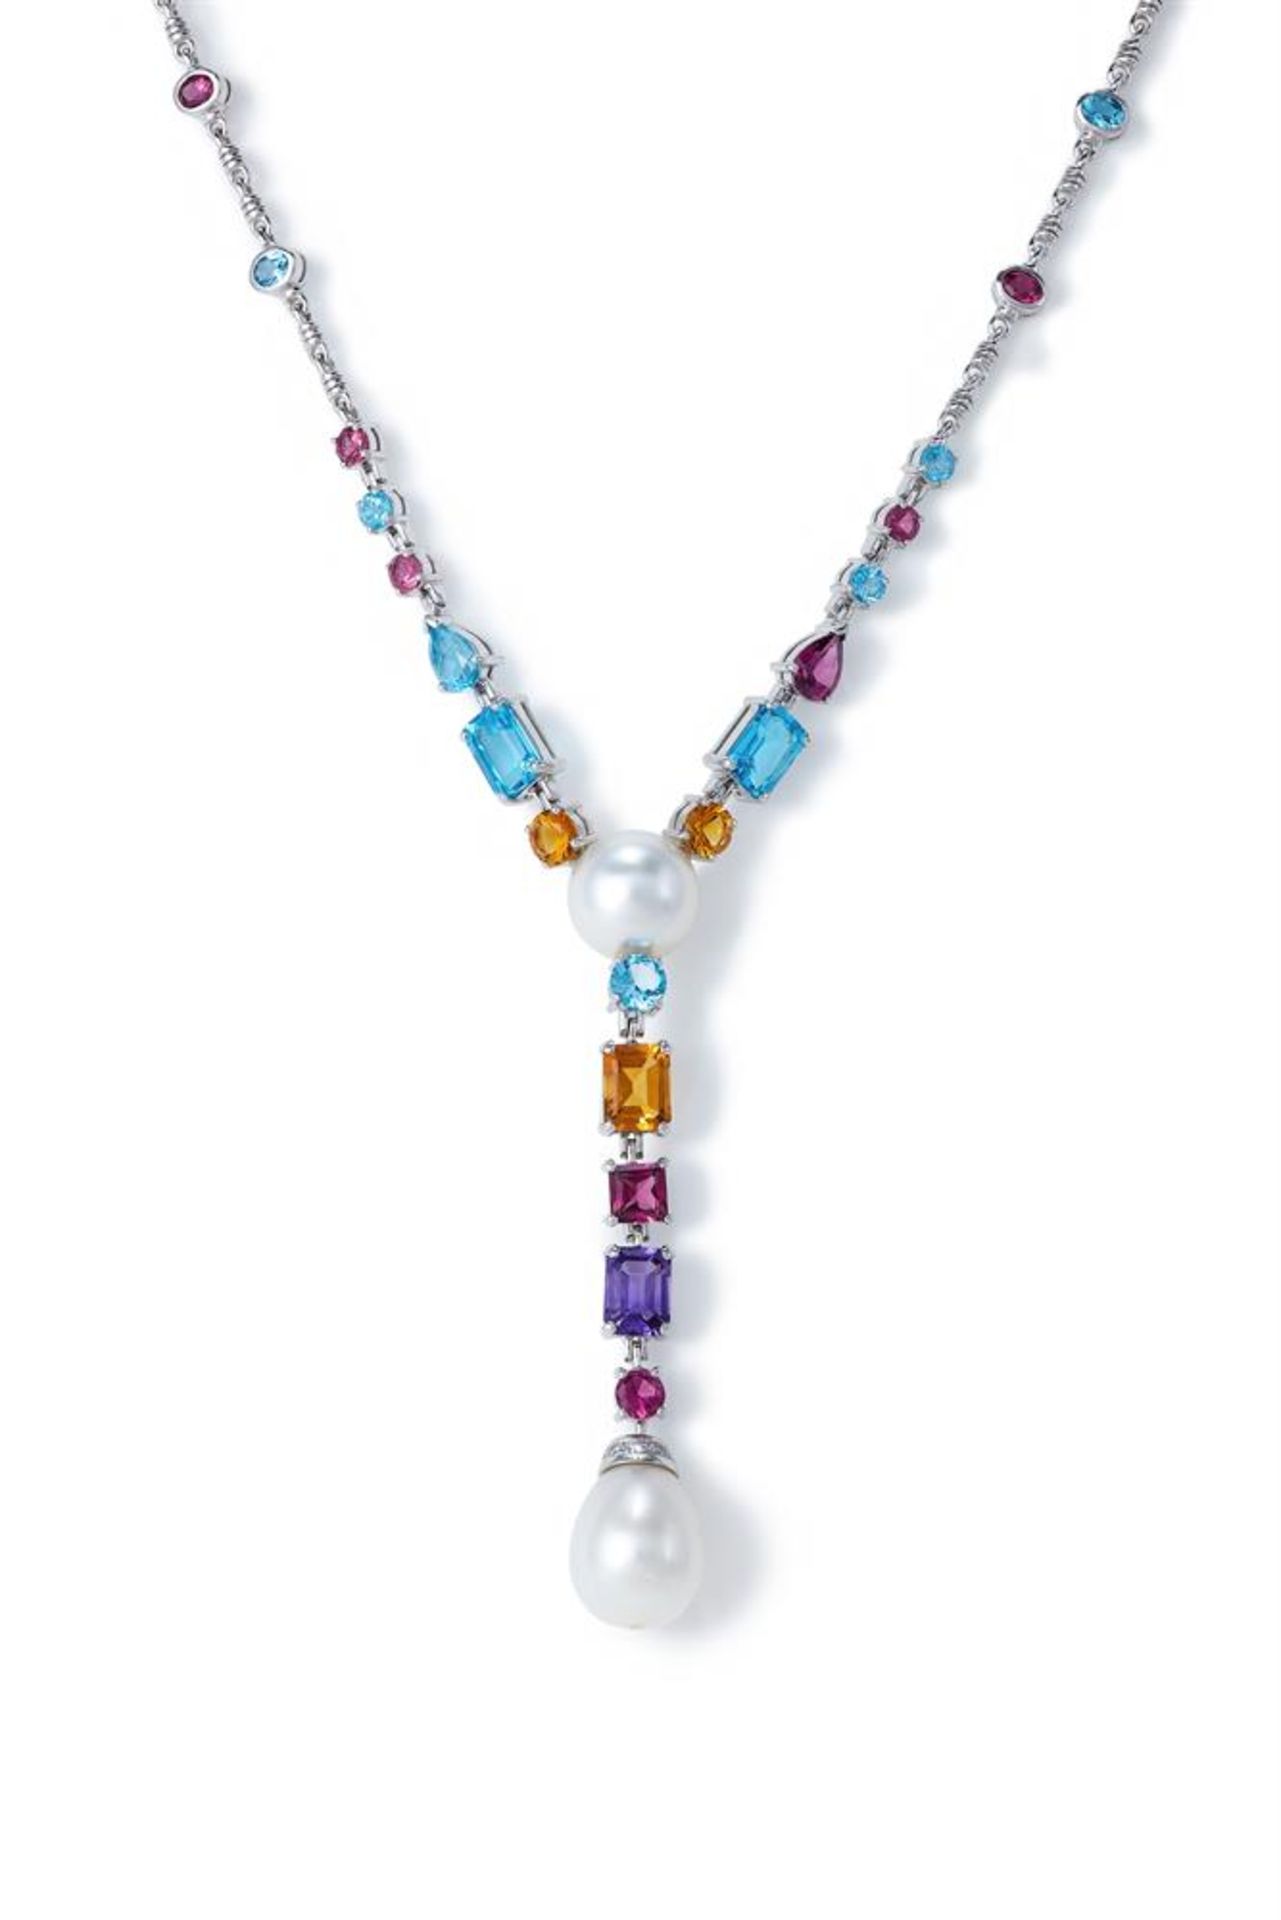 A CULTURED PEARL AND GEM SET PENDANT NECKLACE